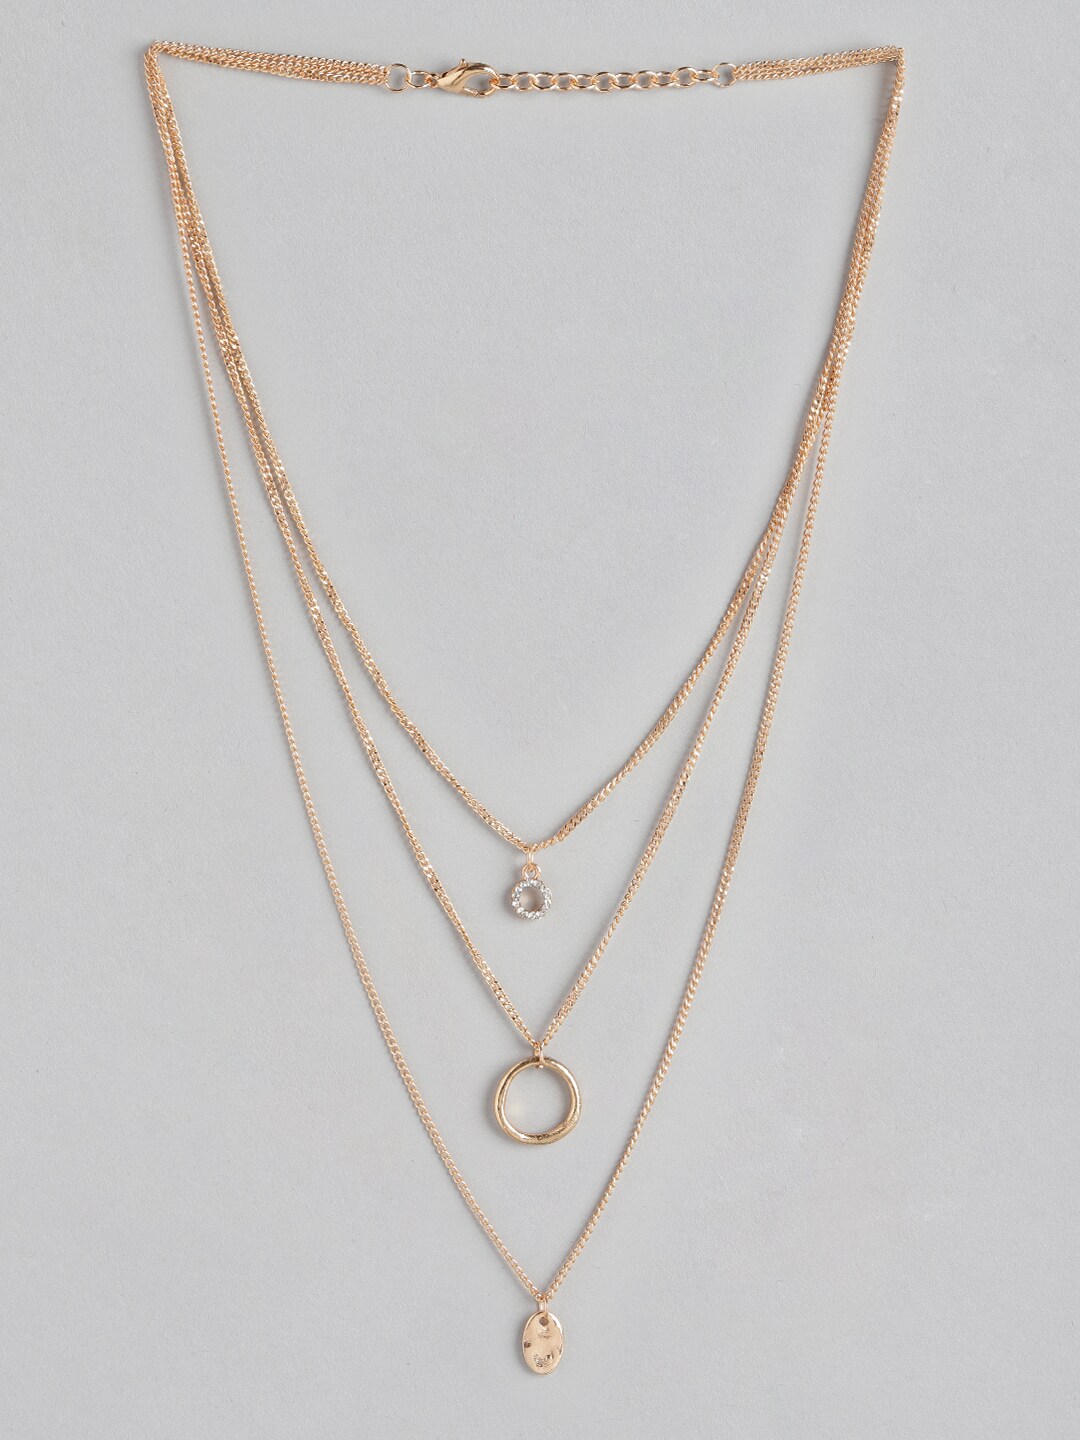 DressBerry Rose Gold-Toned Stone-Studded Layered Necklace Price in India